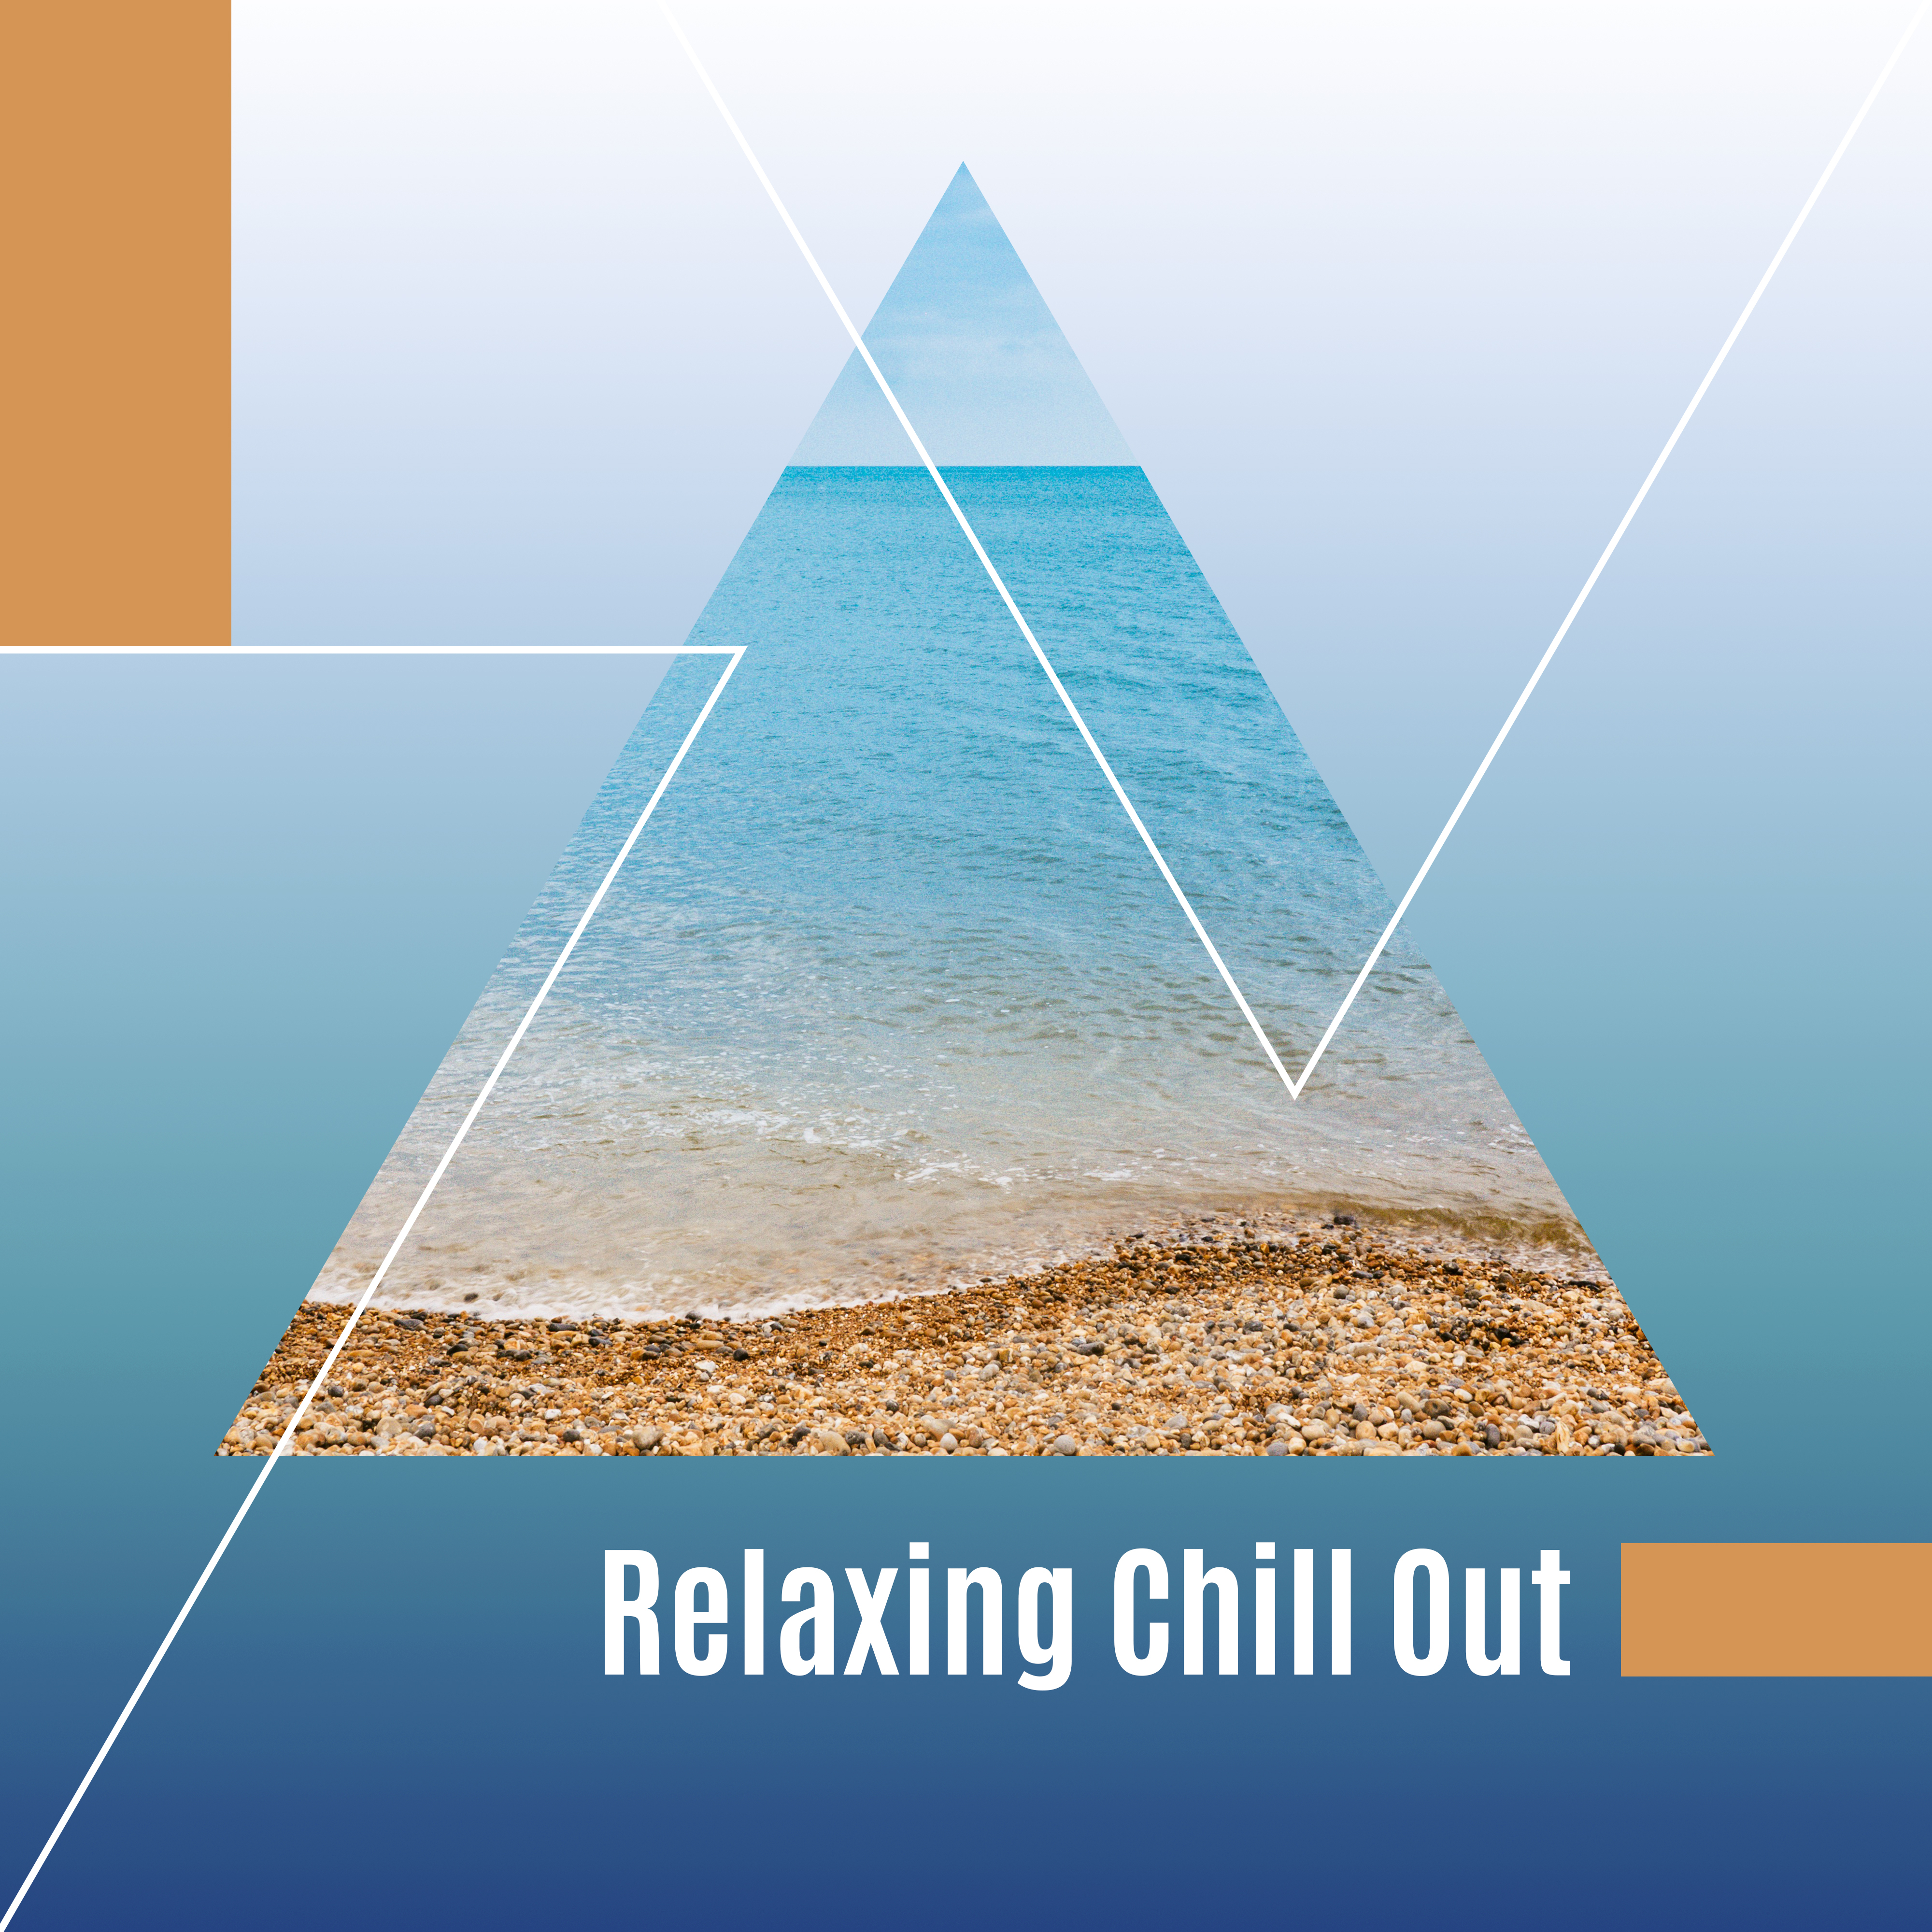 Relaxing Chill Out  Music to Rest, Summertime Sounds, Beach Lounge, Chill a Bit